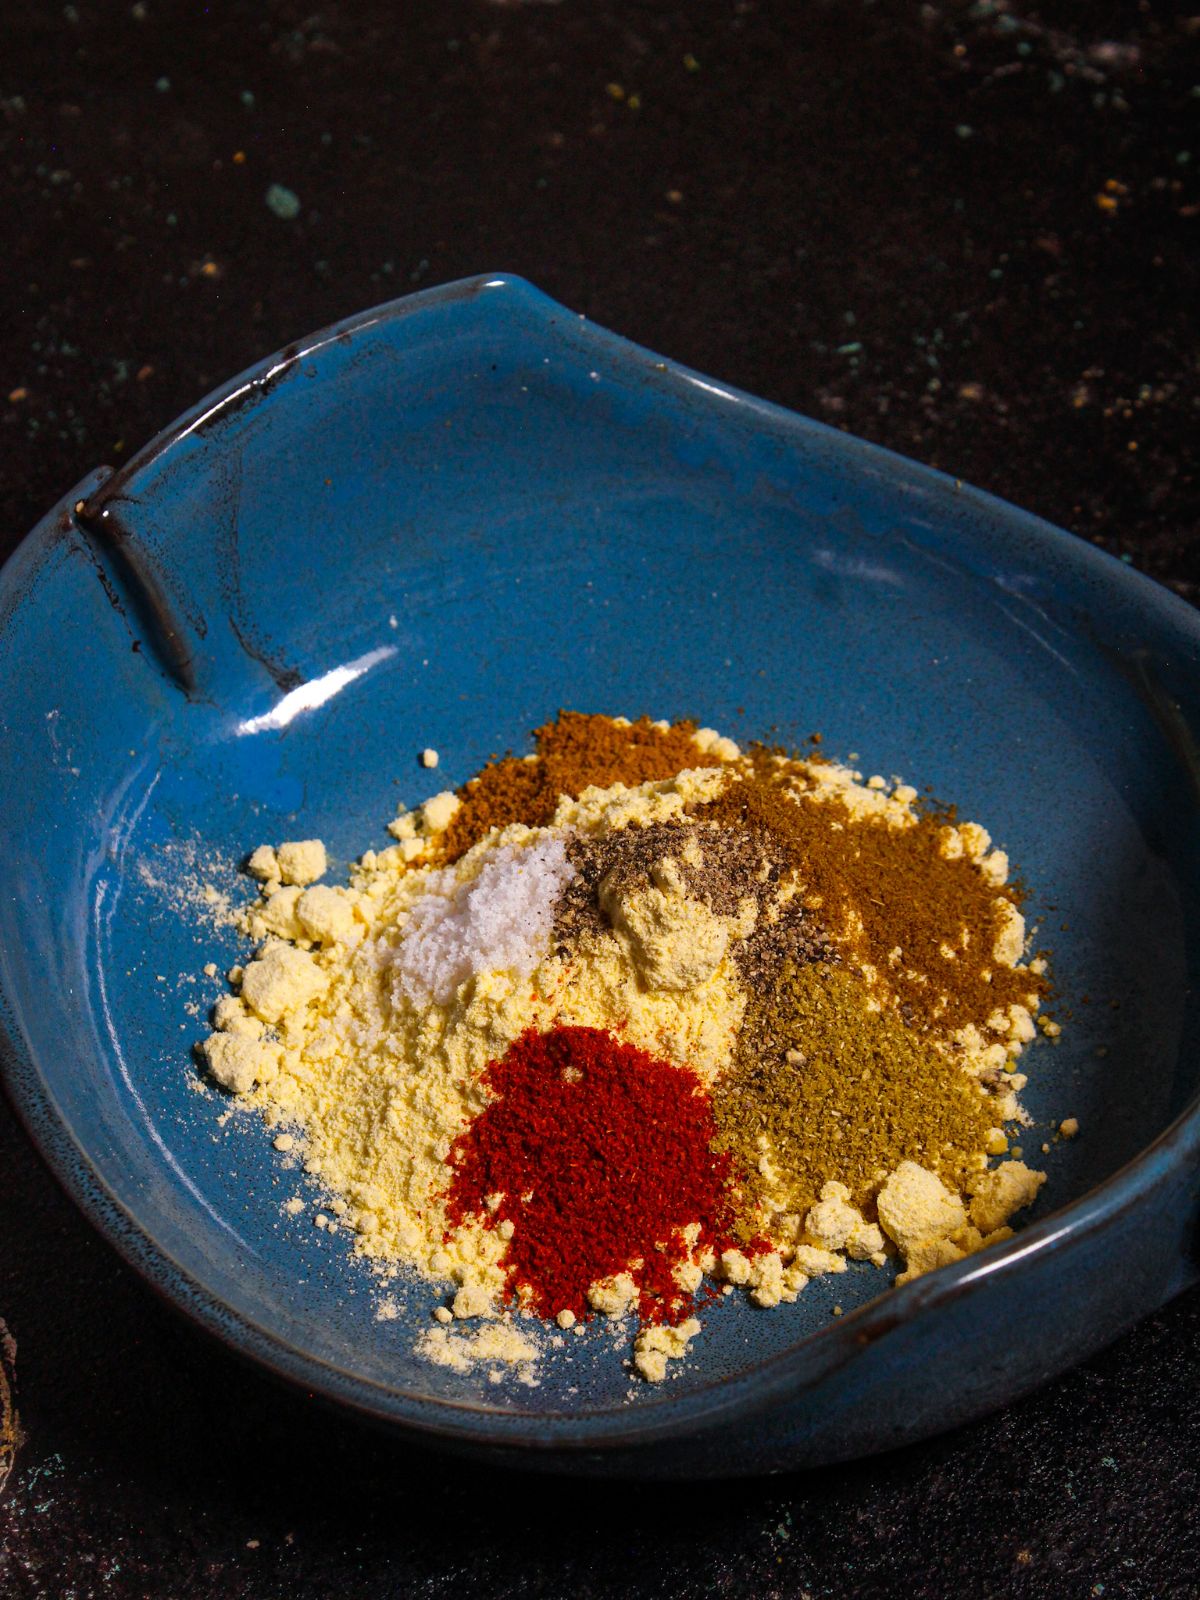 Take besan and other powdered spices in a plate and mix well to get a paste 